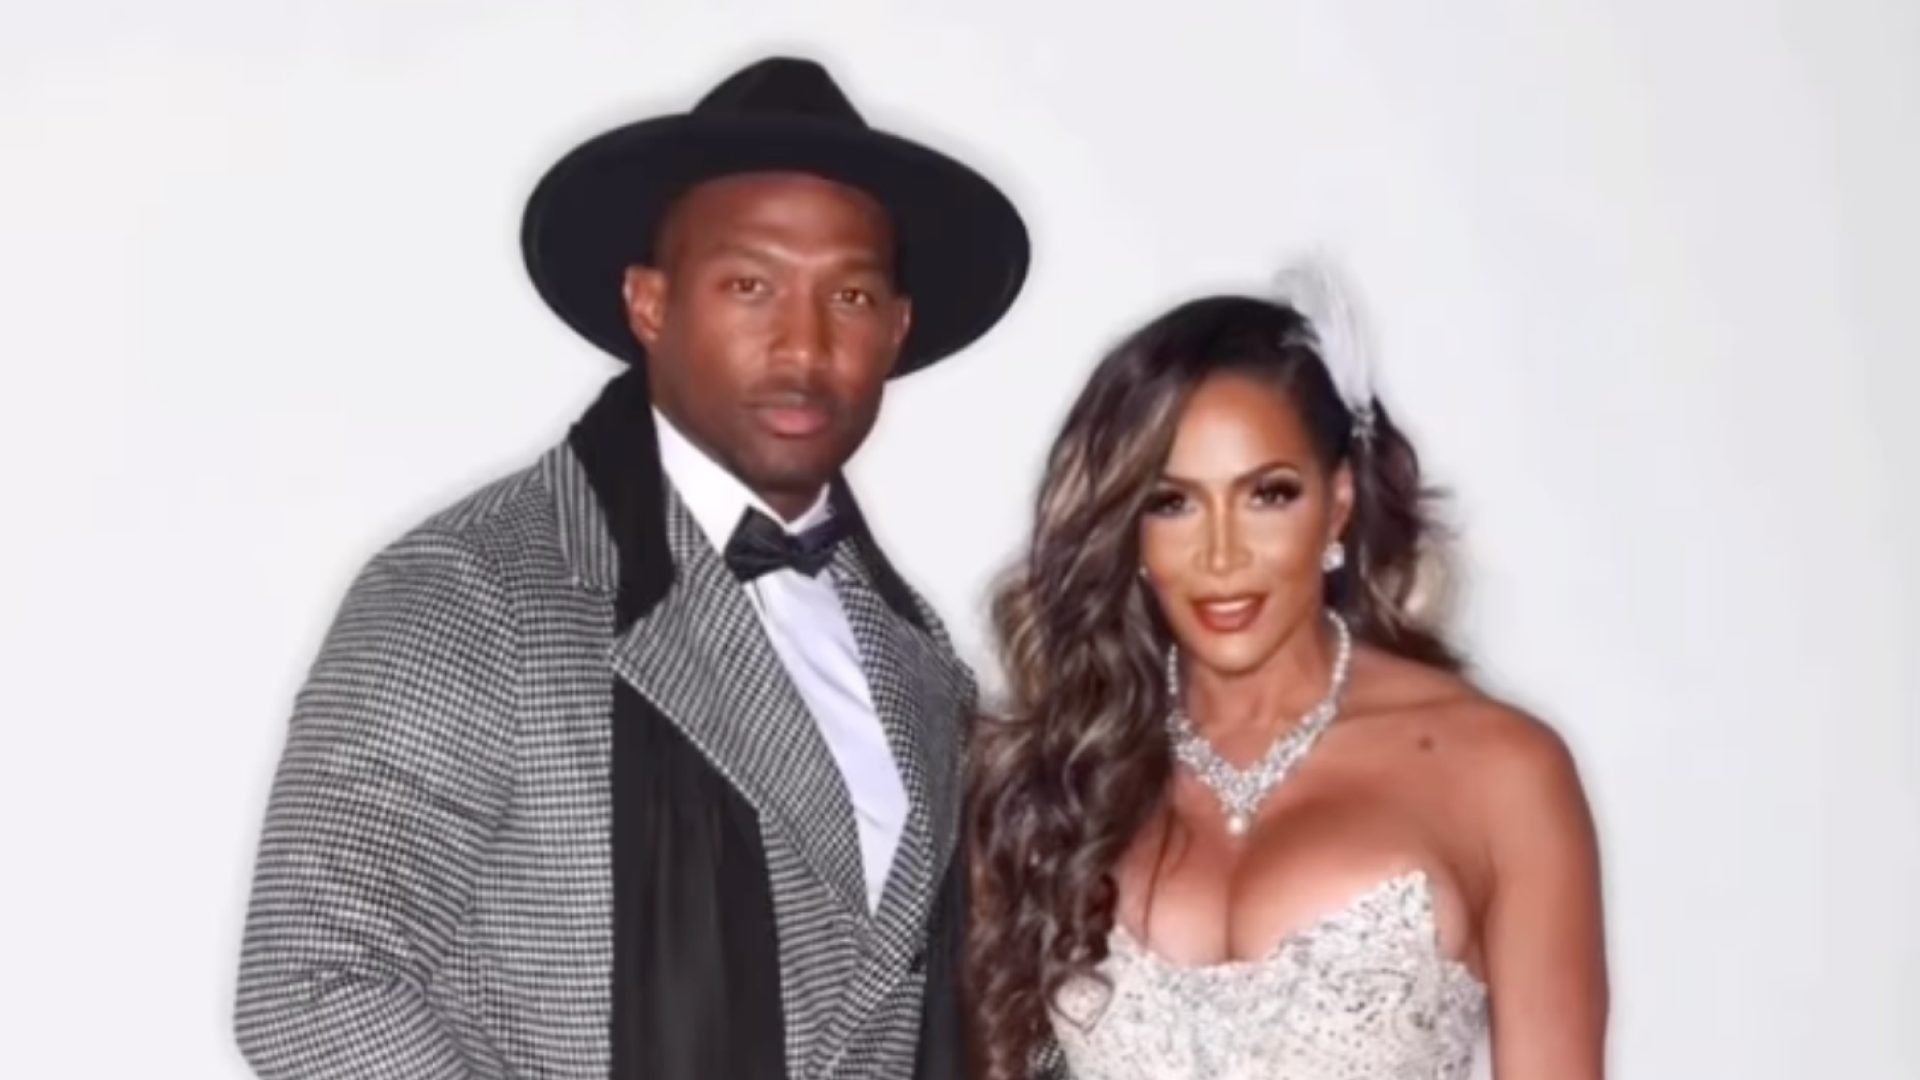 Sheree Whitfield And Martell Holt Step Out For Their First Black-Tie Event As A Couple